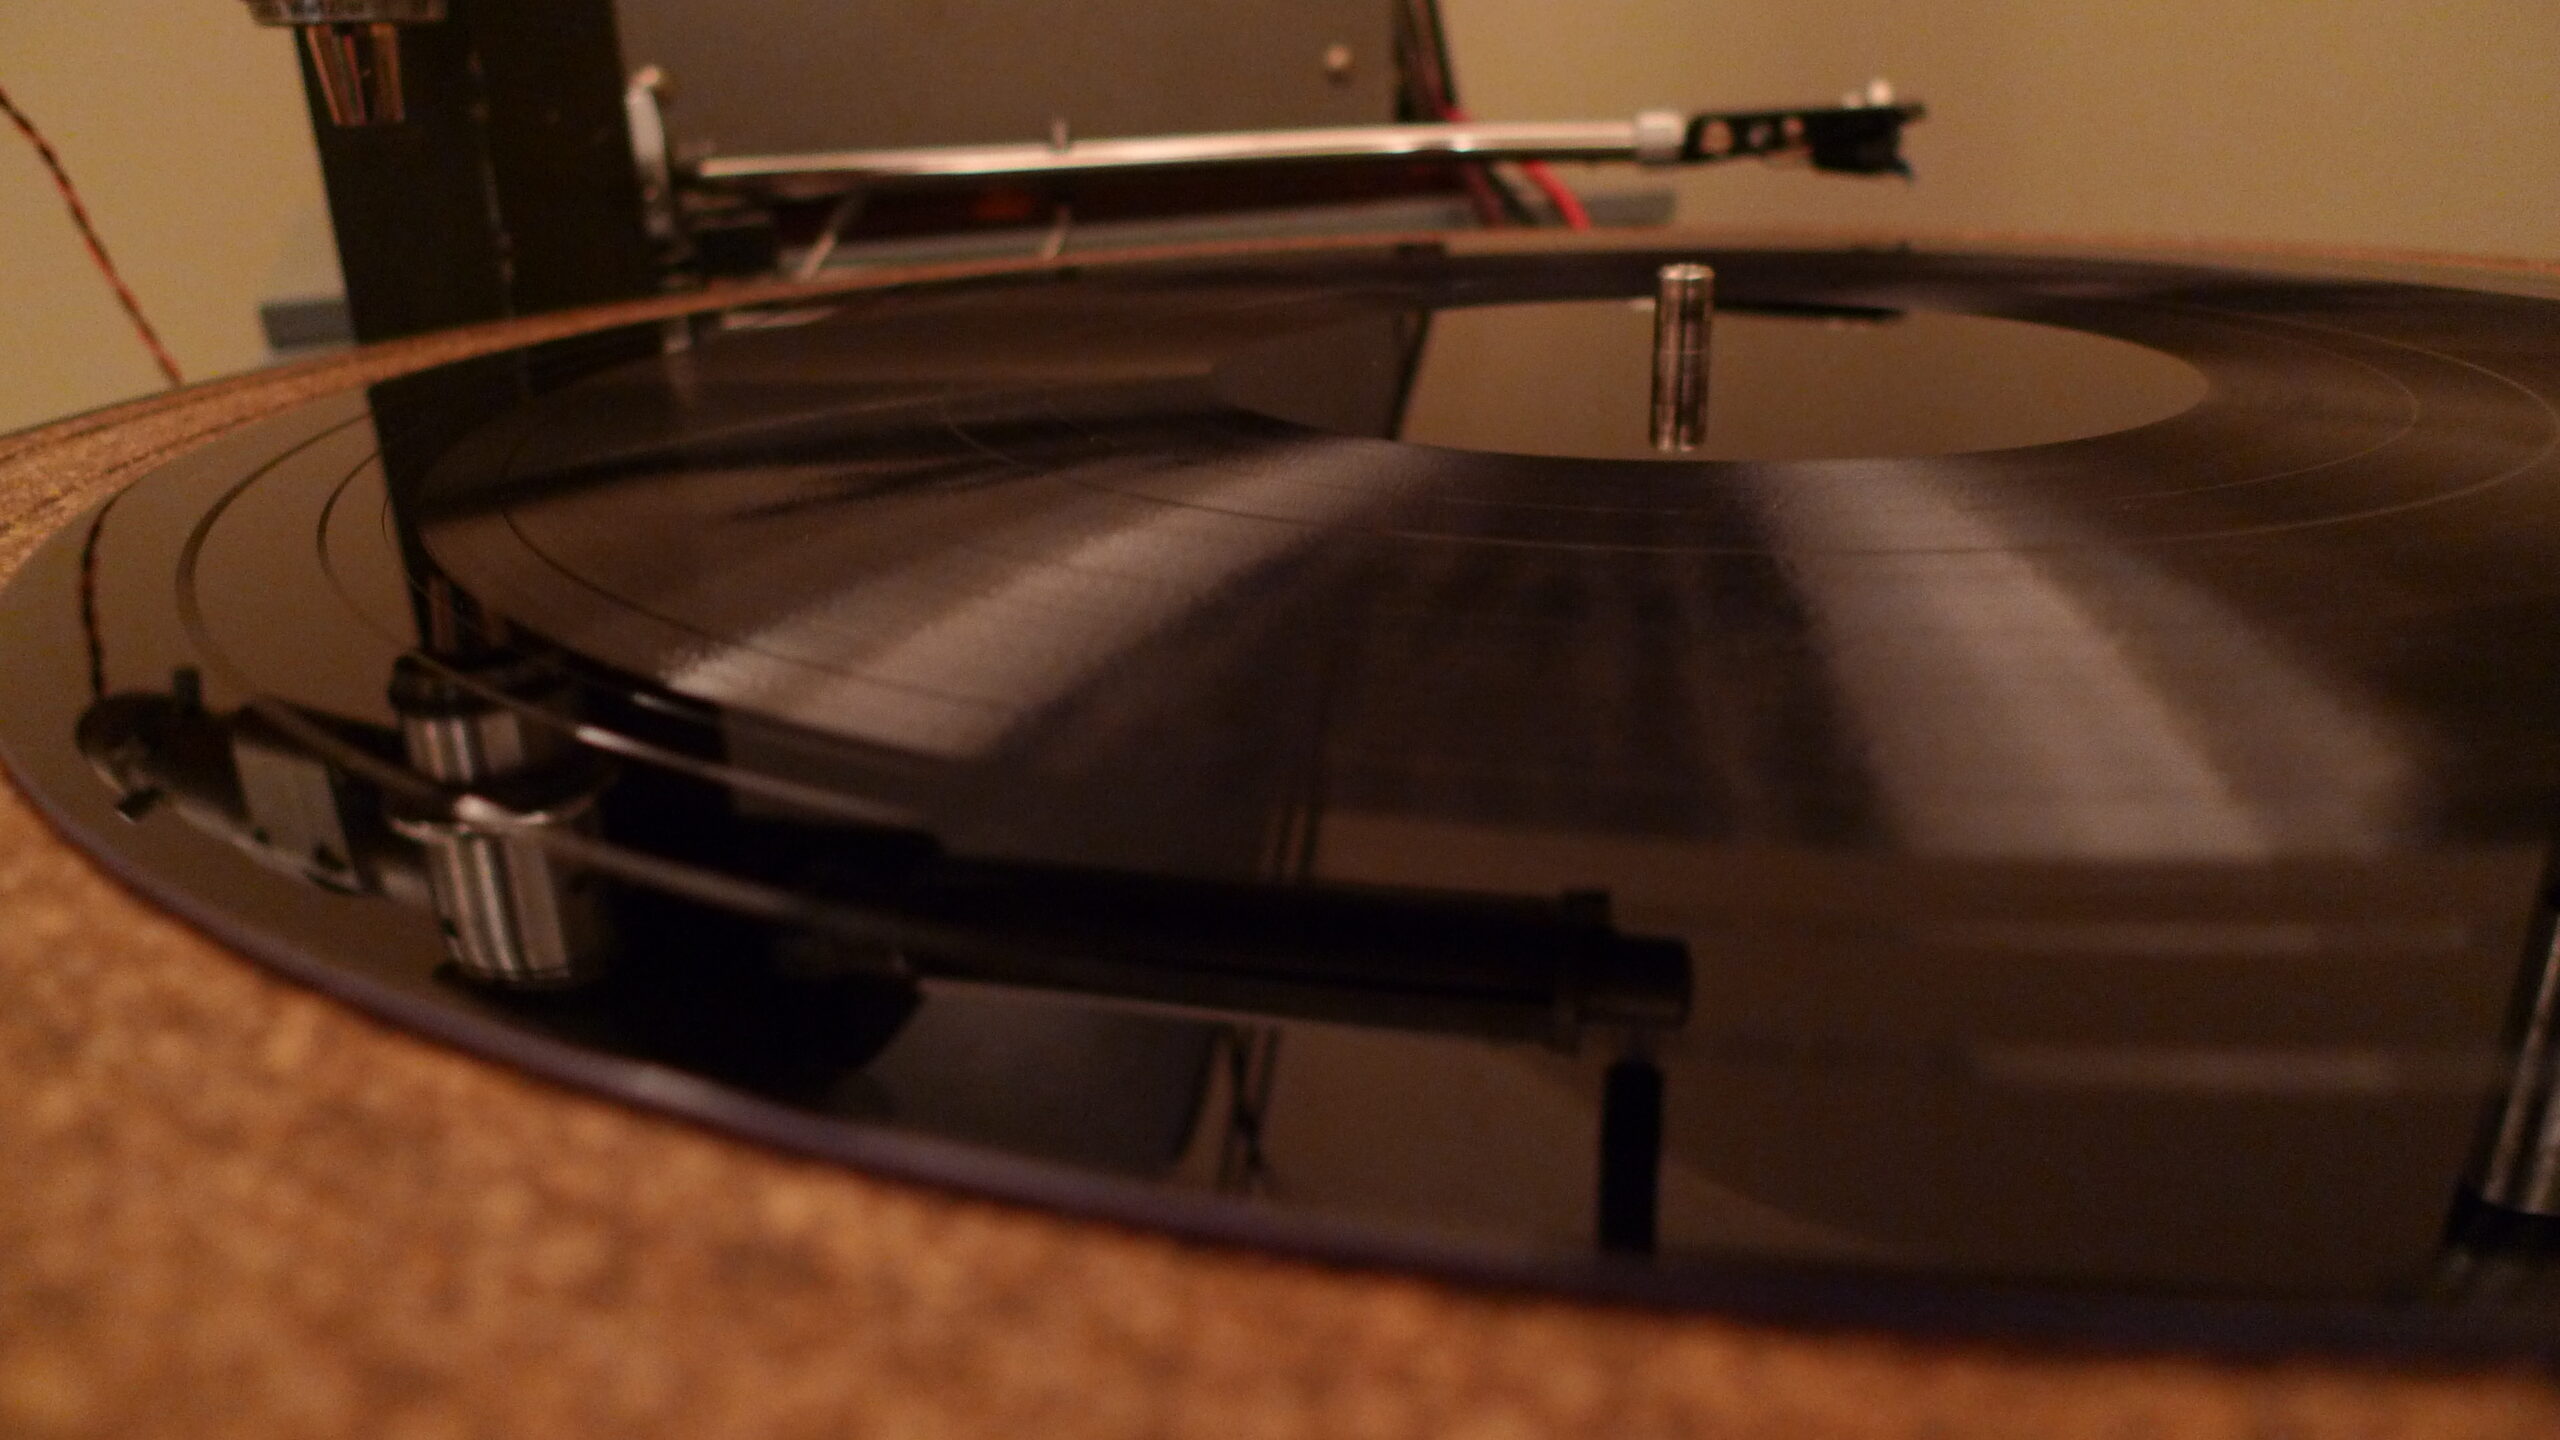 LP on a turntable